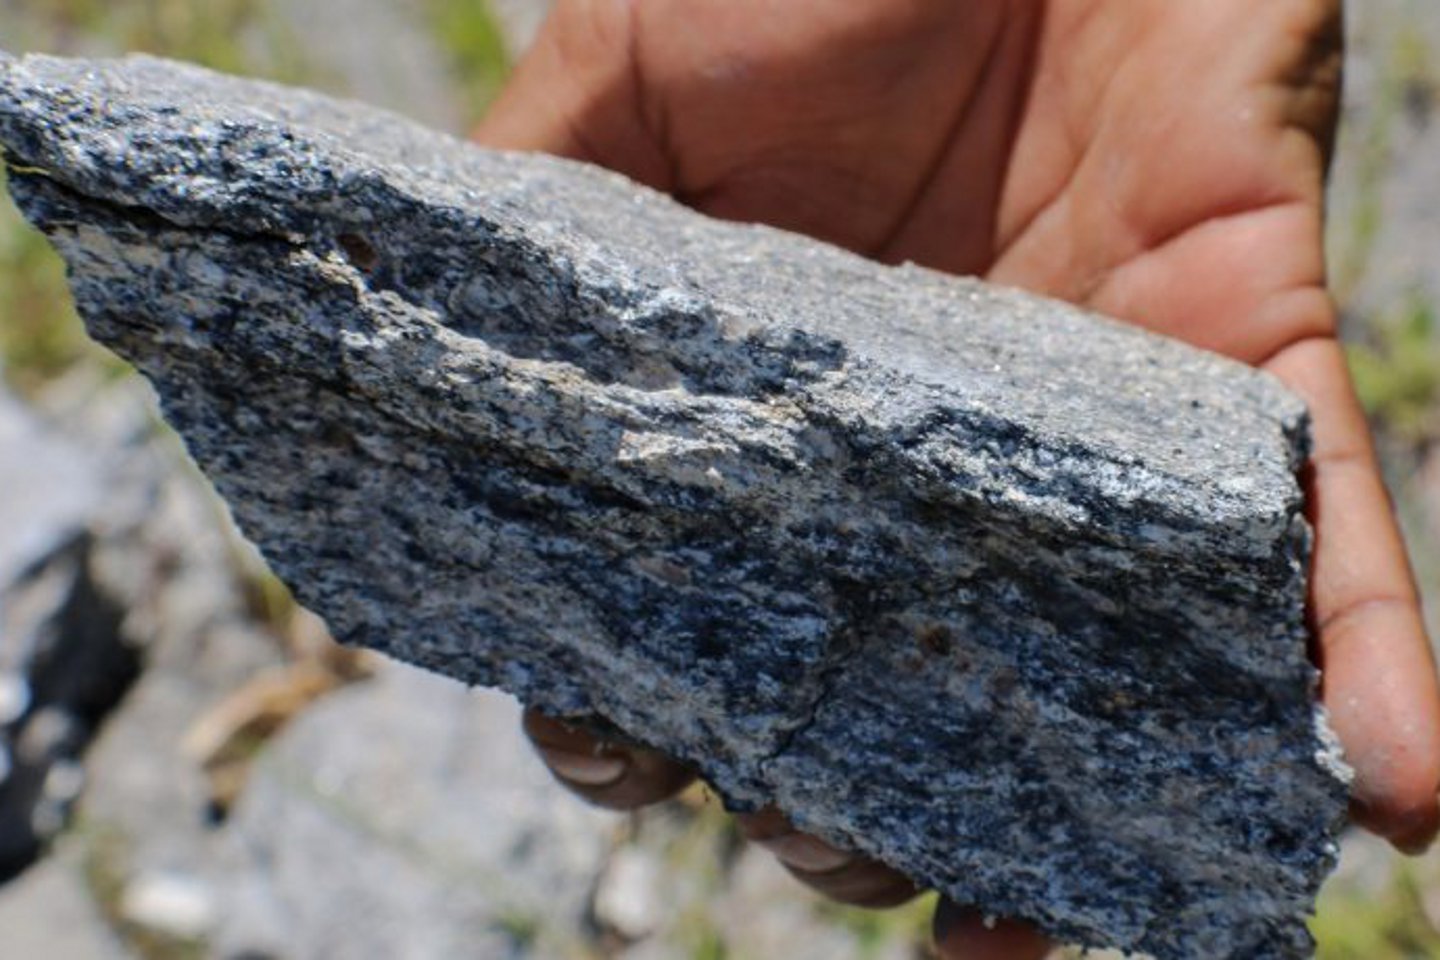 Walkabout hikes resource at Tanzania graphite project